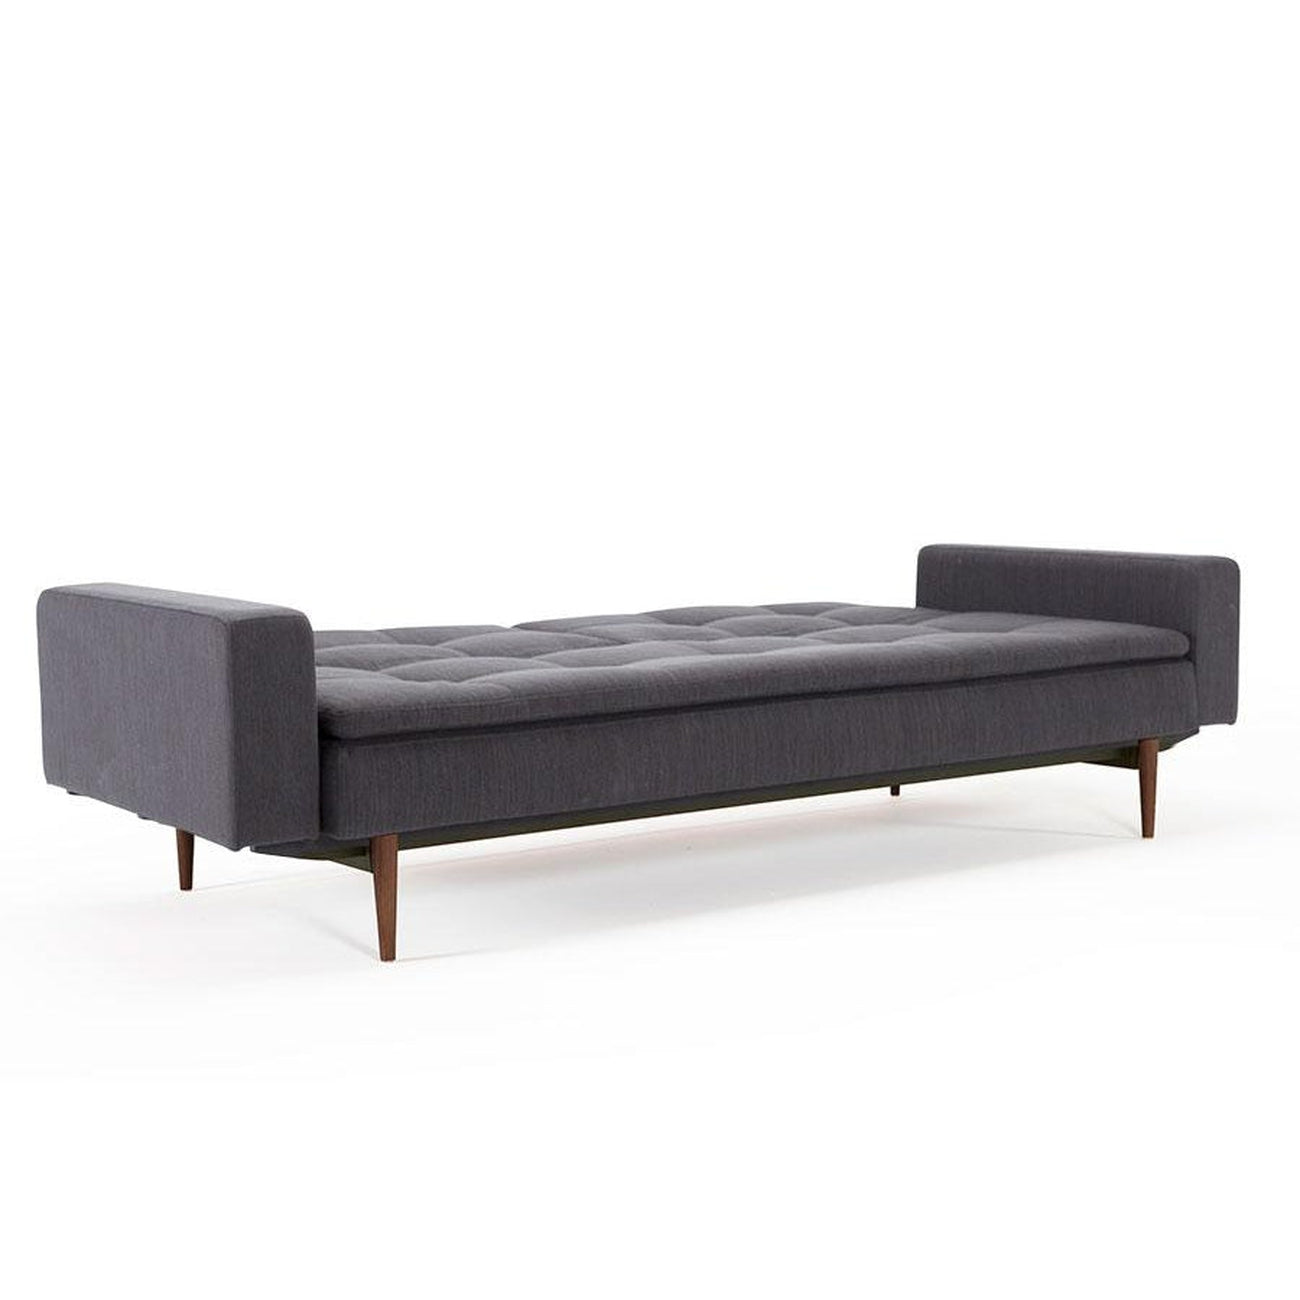 Dublexo Deluxe Sofa W/Arms,DARK WOOD-Innovation Living-INNO-94-741050020527-10-3-SofasMixed Dance Natural-9-France and Son